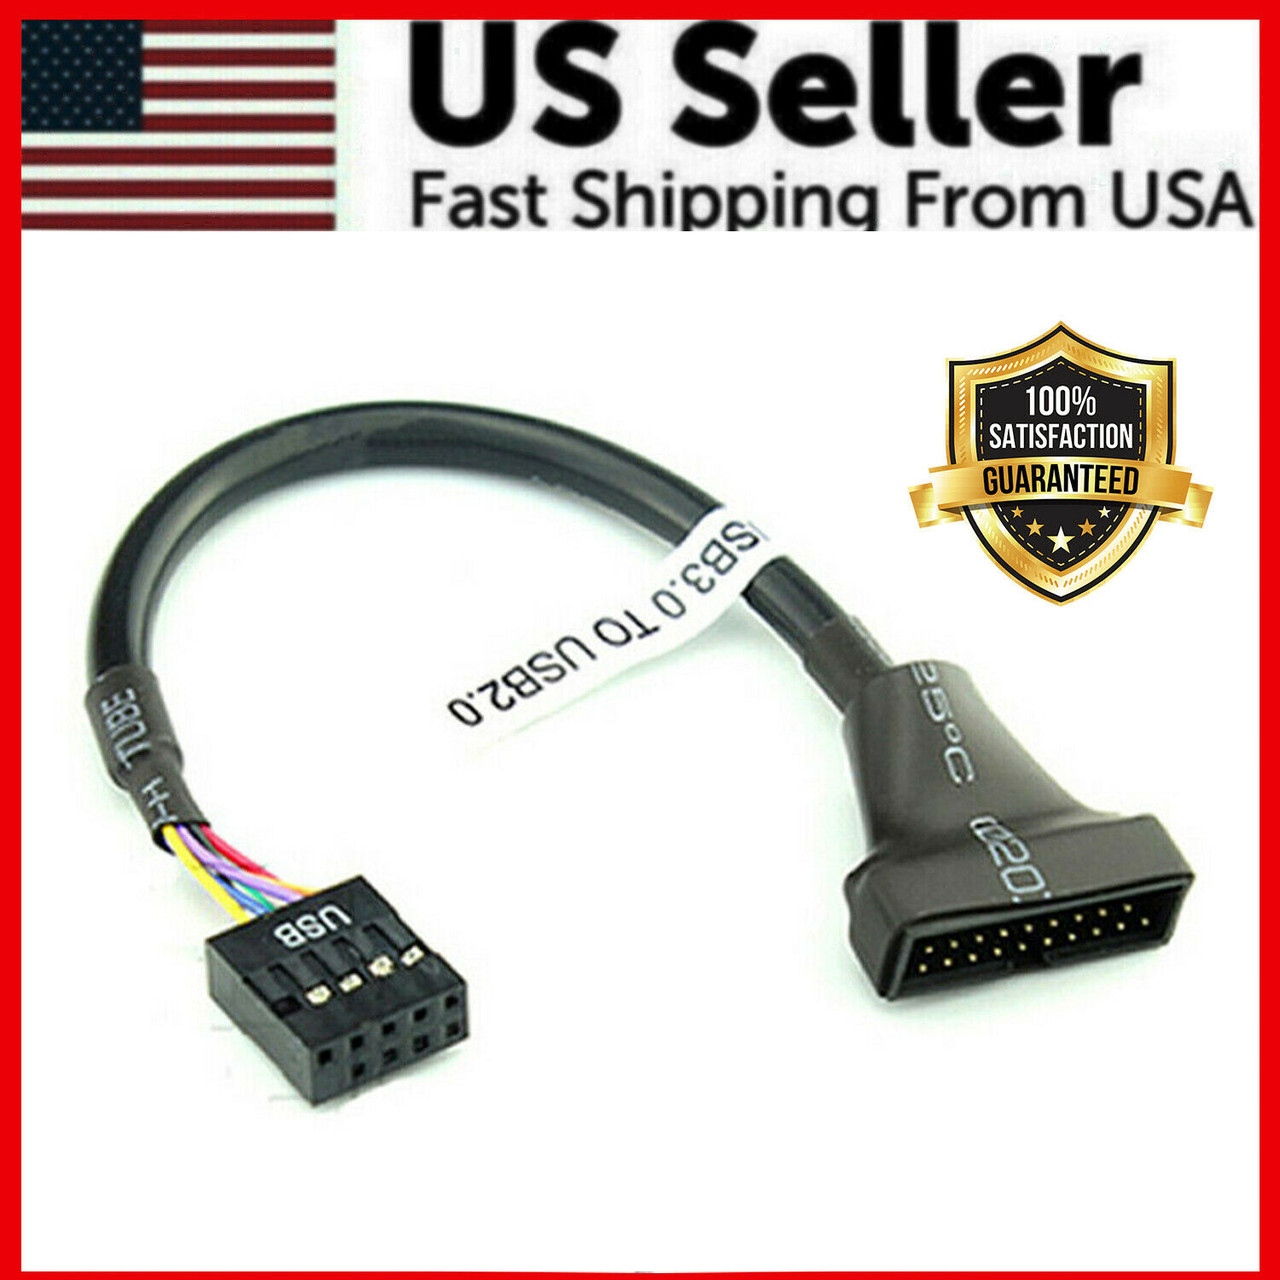 New Portable USB 3.0 20-PIN Header Male to USB 2.0 9-PIN Female Adapter Black